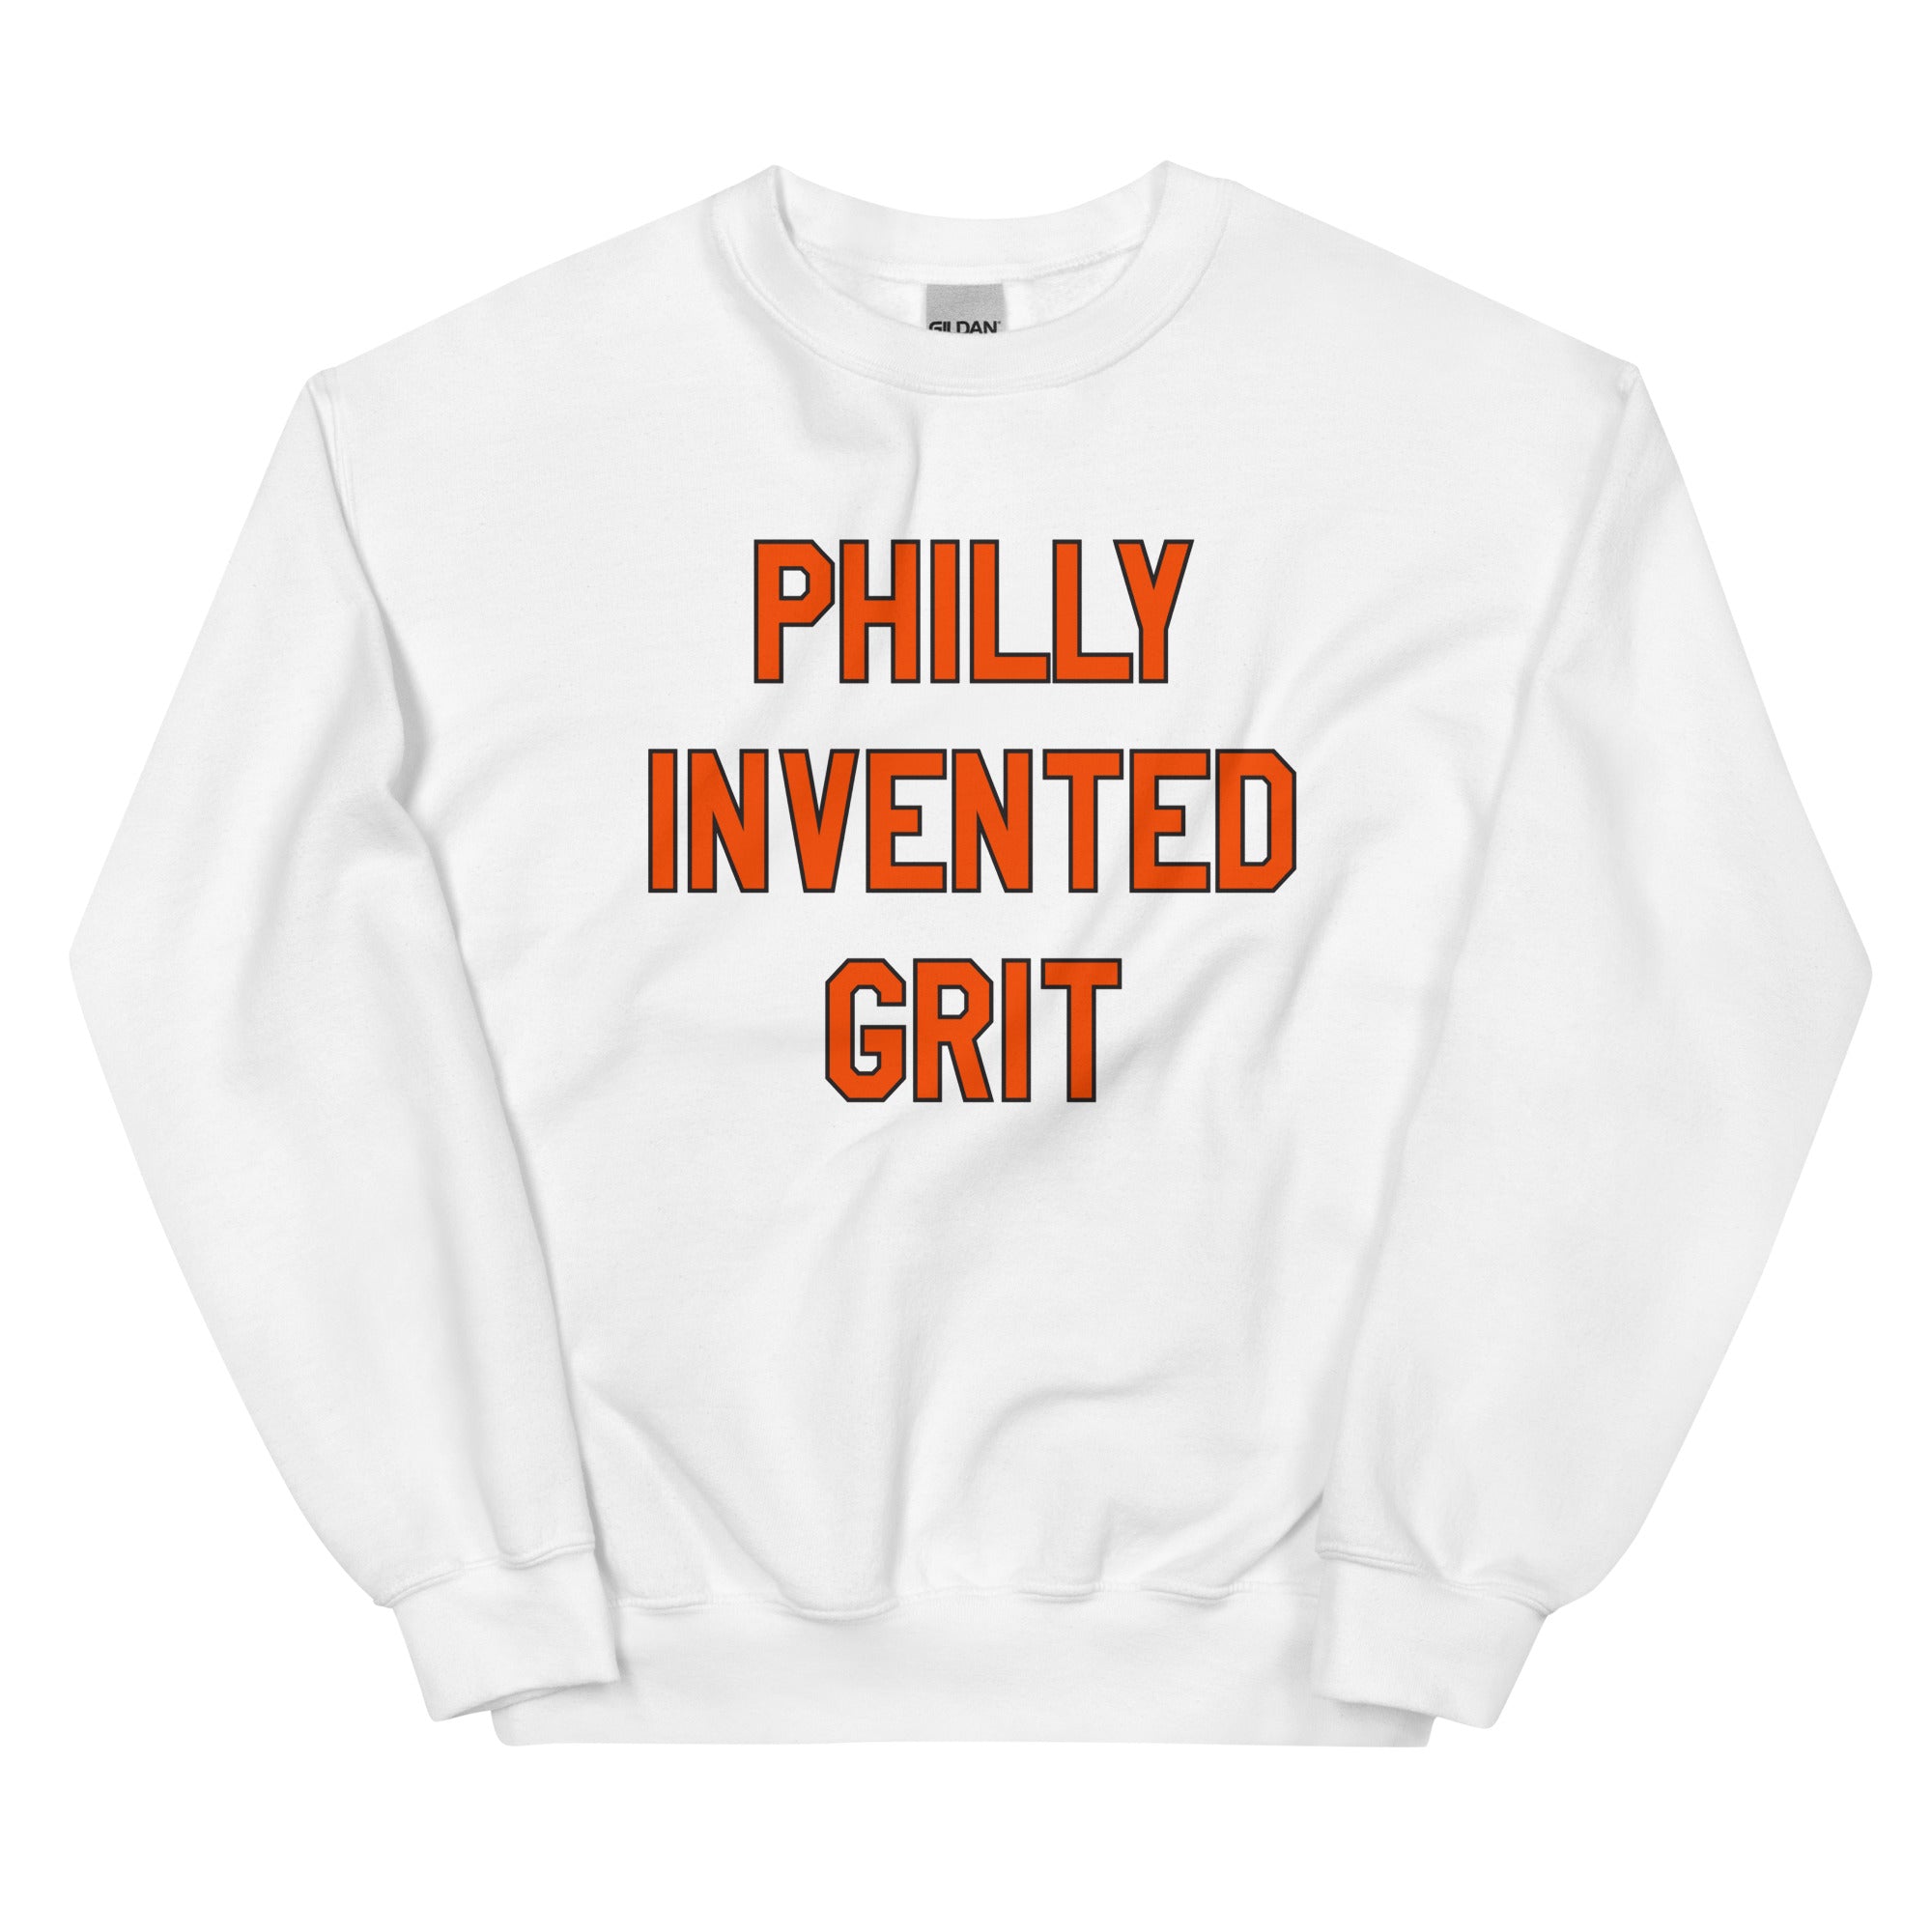 Philadelphia Flyers Philly invented grit white sweatshirt Phillygoat